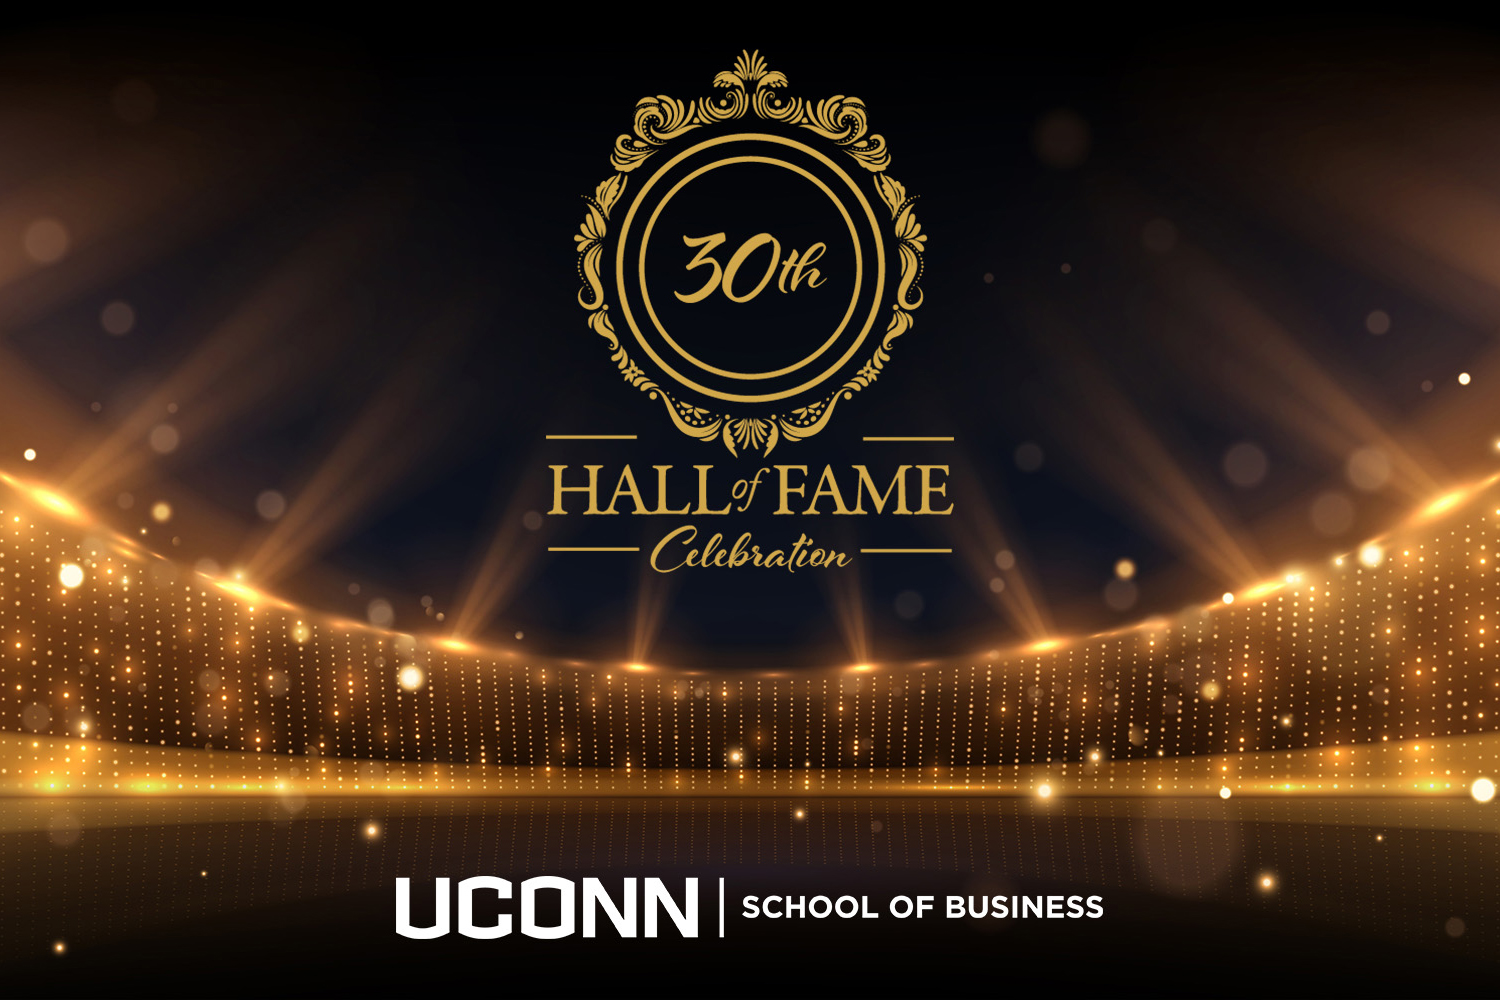 School of Business Celebrates 30th Anniversary 'Hall of Fame